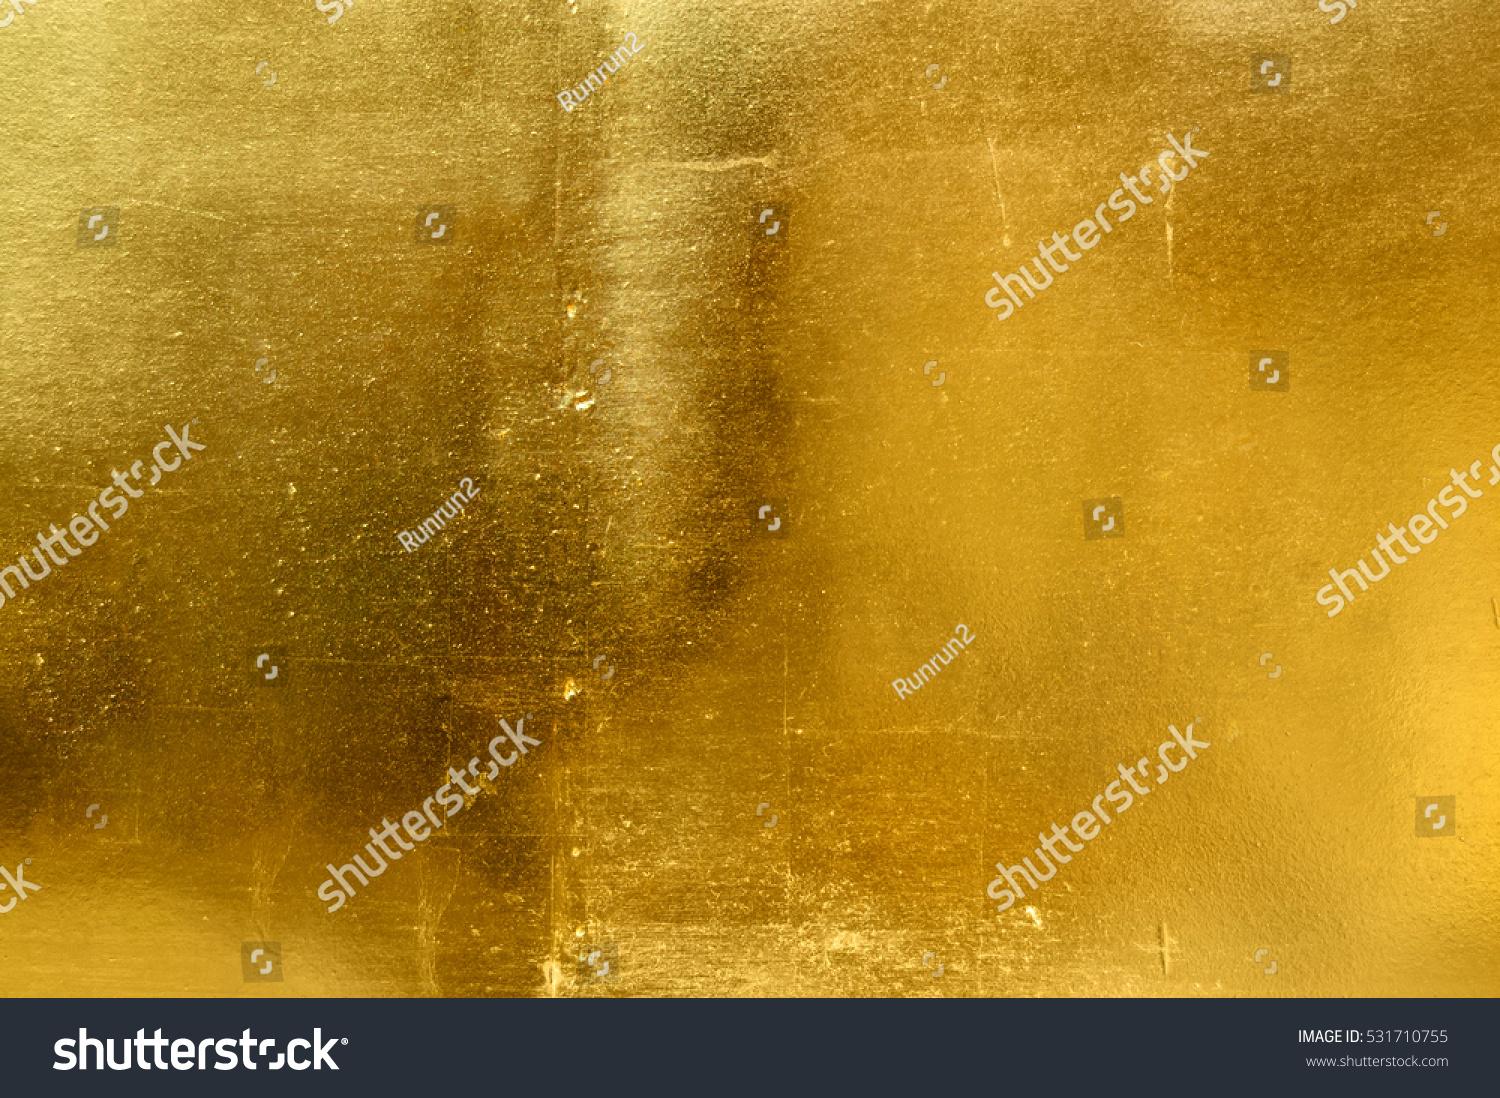 Gold texture wall #531710755